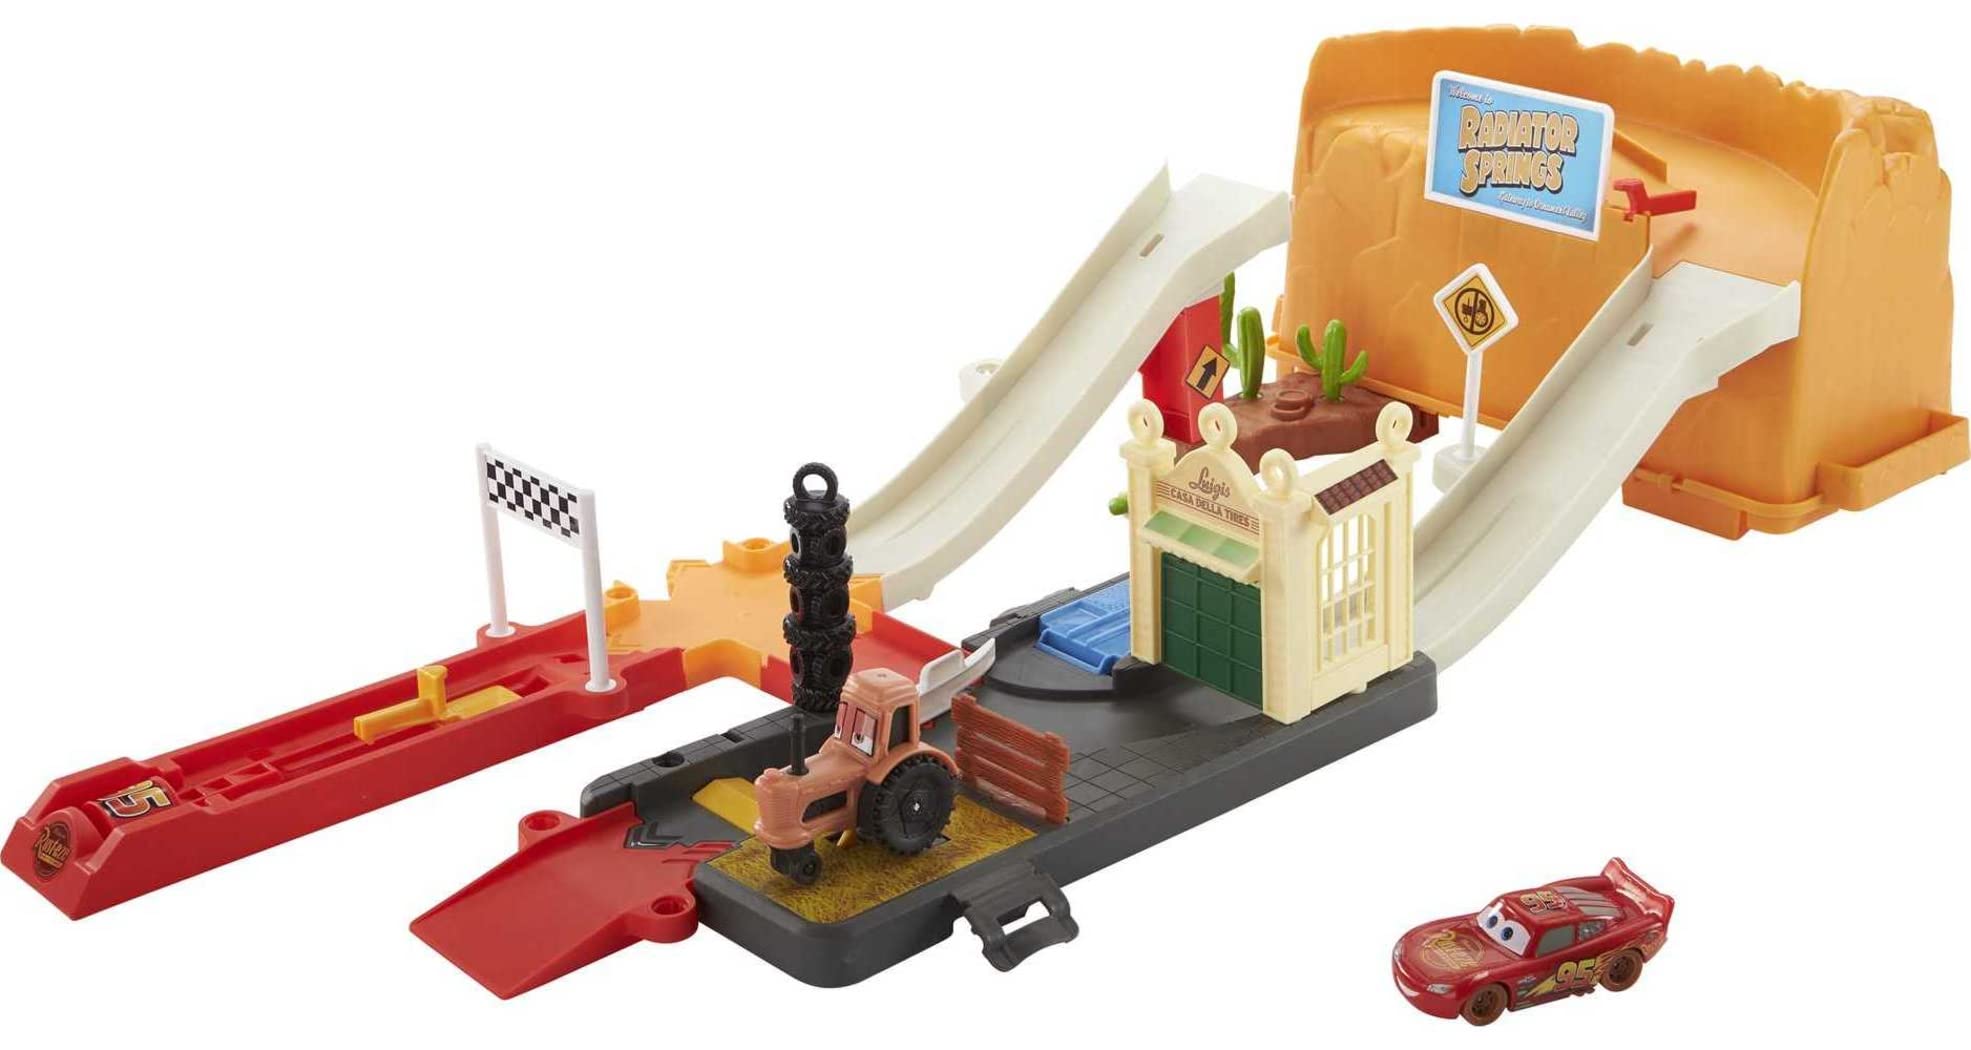 Mattel Disney Pixar Cars Toys, Track Set and Storage with Lightning McQueen Toy Car, Race and Go Playset $13.29